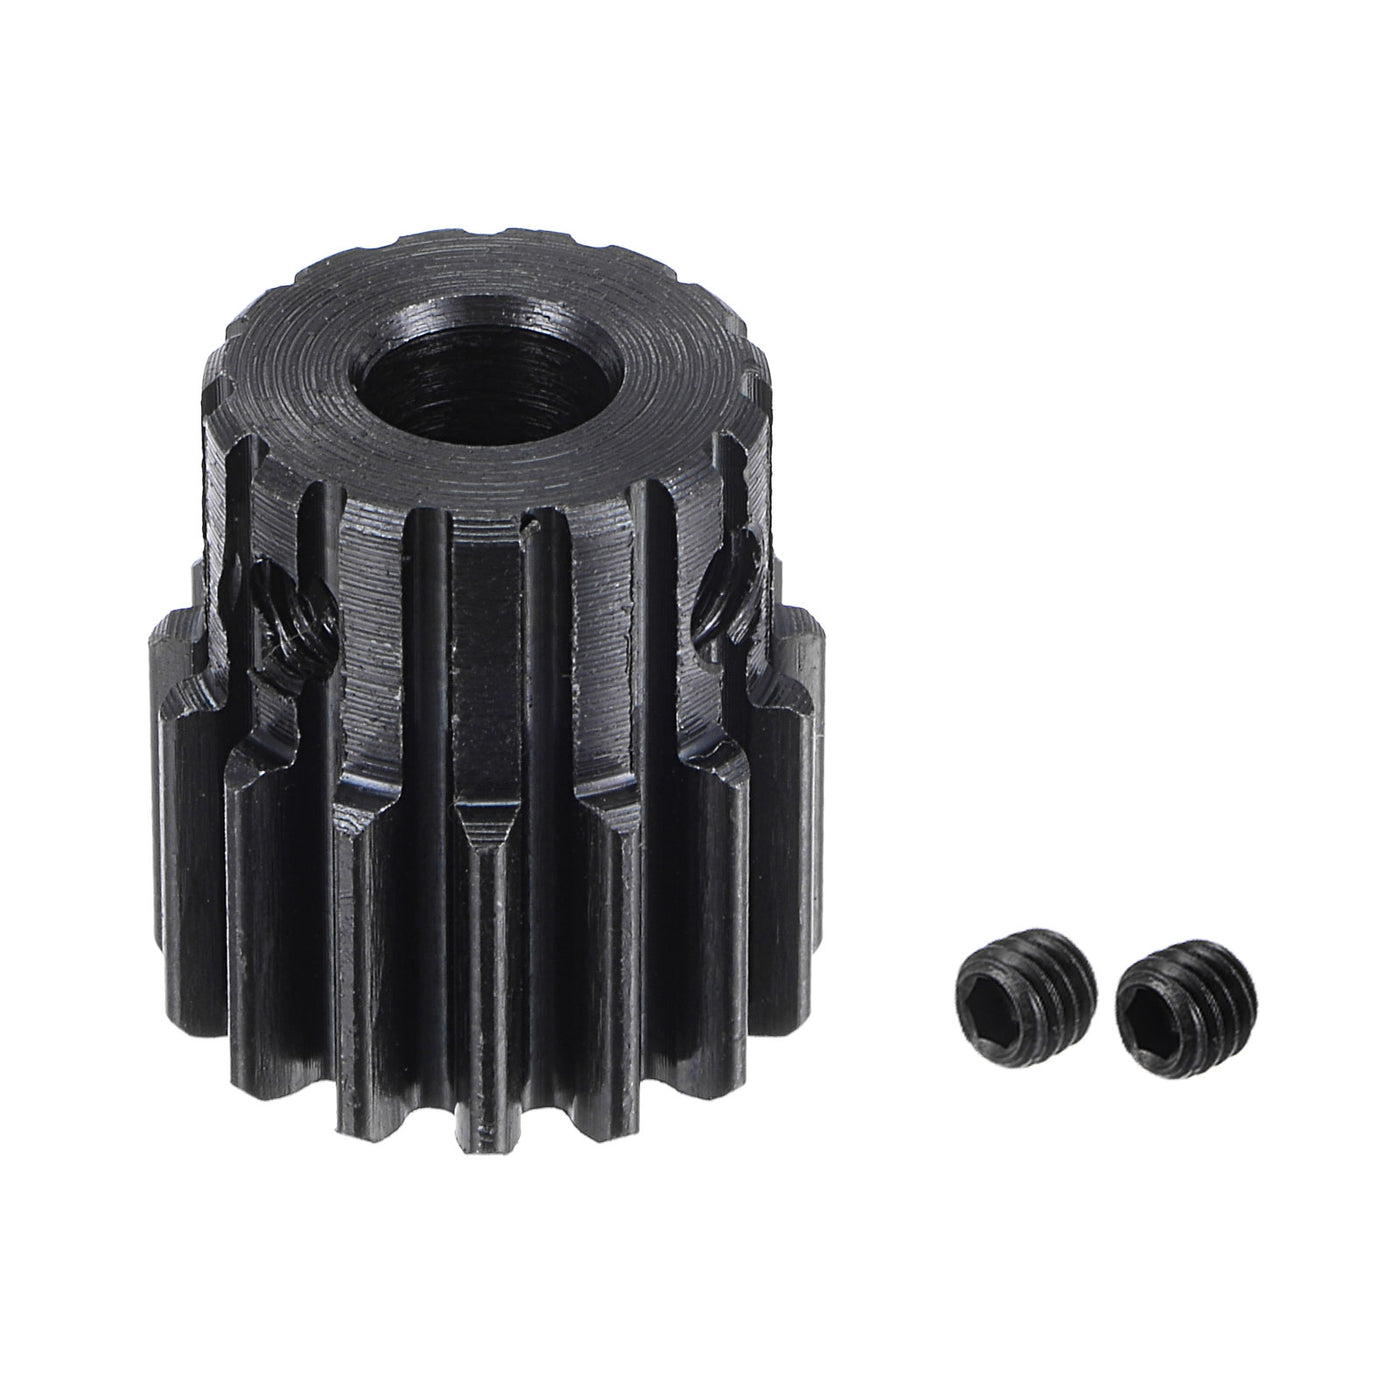 uxcell Uxcell 6mm Aperture 15T Mod 1 45# Steel Spur Diff Differential Motor Pinion Gear